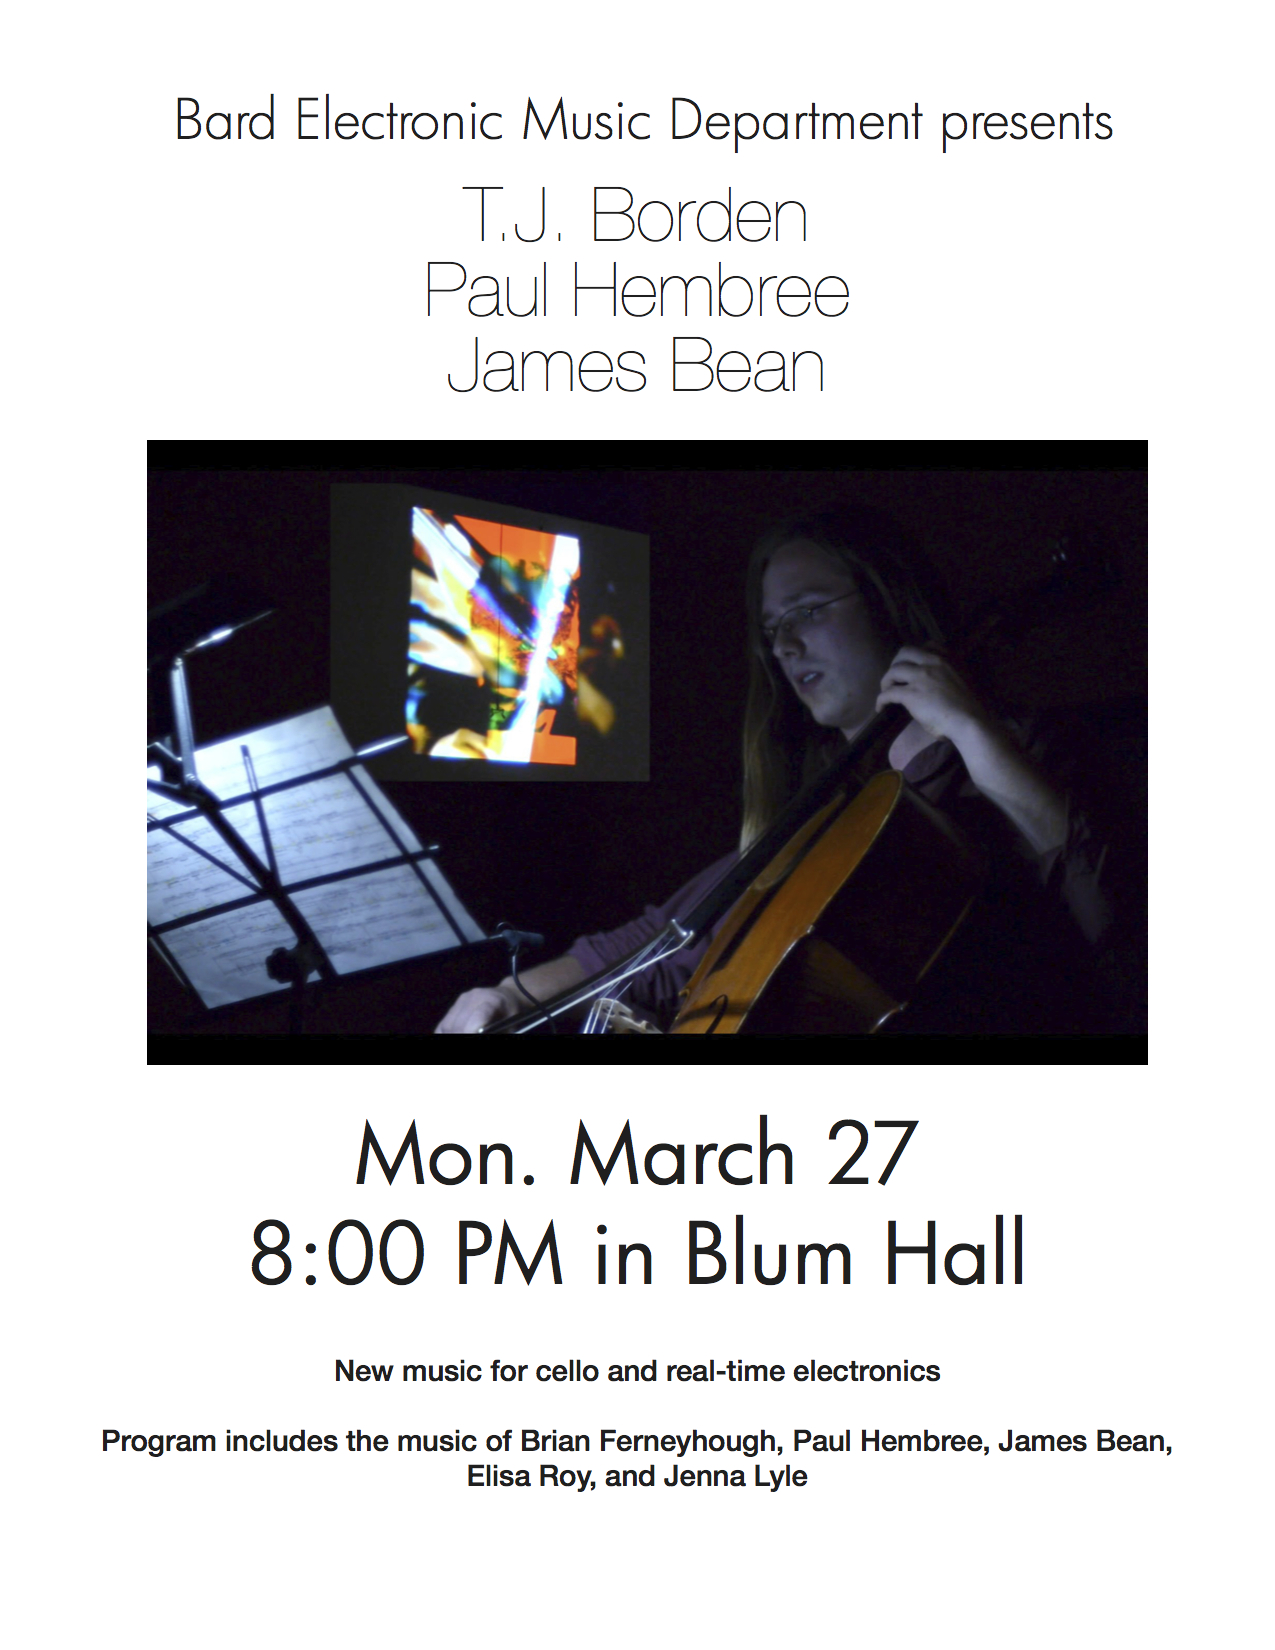 Bard Electronic Music Department presents TJ Borden, Paul Hembree, and James Bean